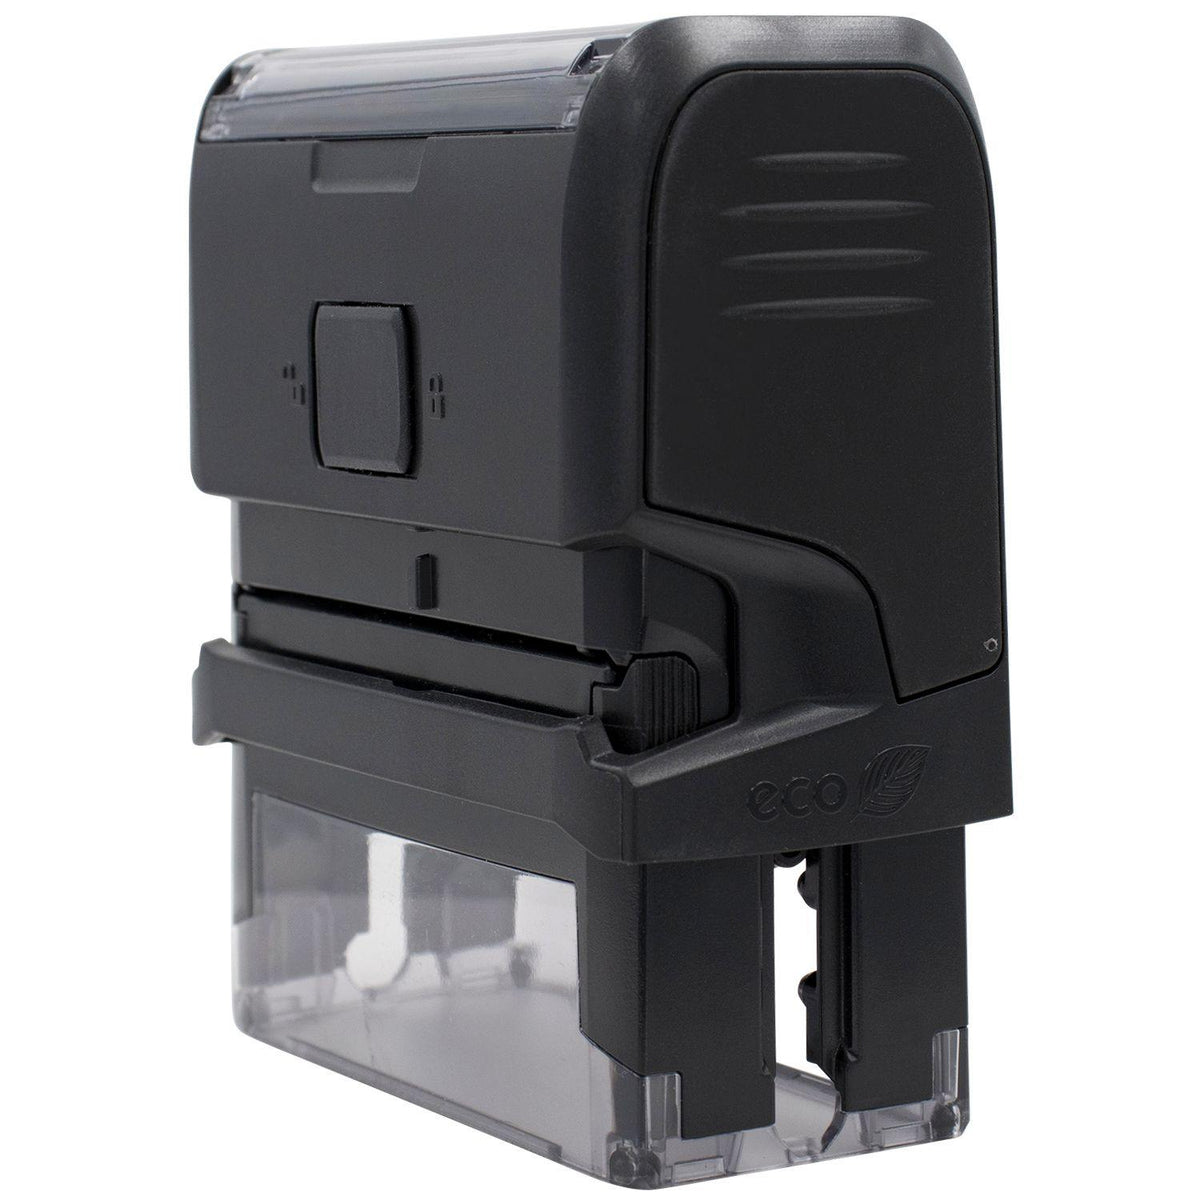 Self-Inking Your Insurance has Paid their Portion Stamp - Engineer Seal Stamps - Brand_Trodat, Impression Size_Small, Stamp Type_Self-Inking Stamp, Type of Use_Finance, Type of Use_Medical Office